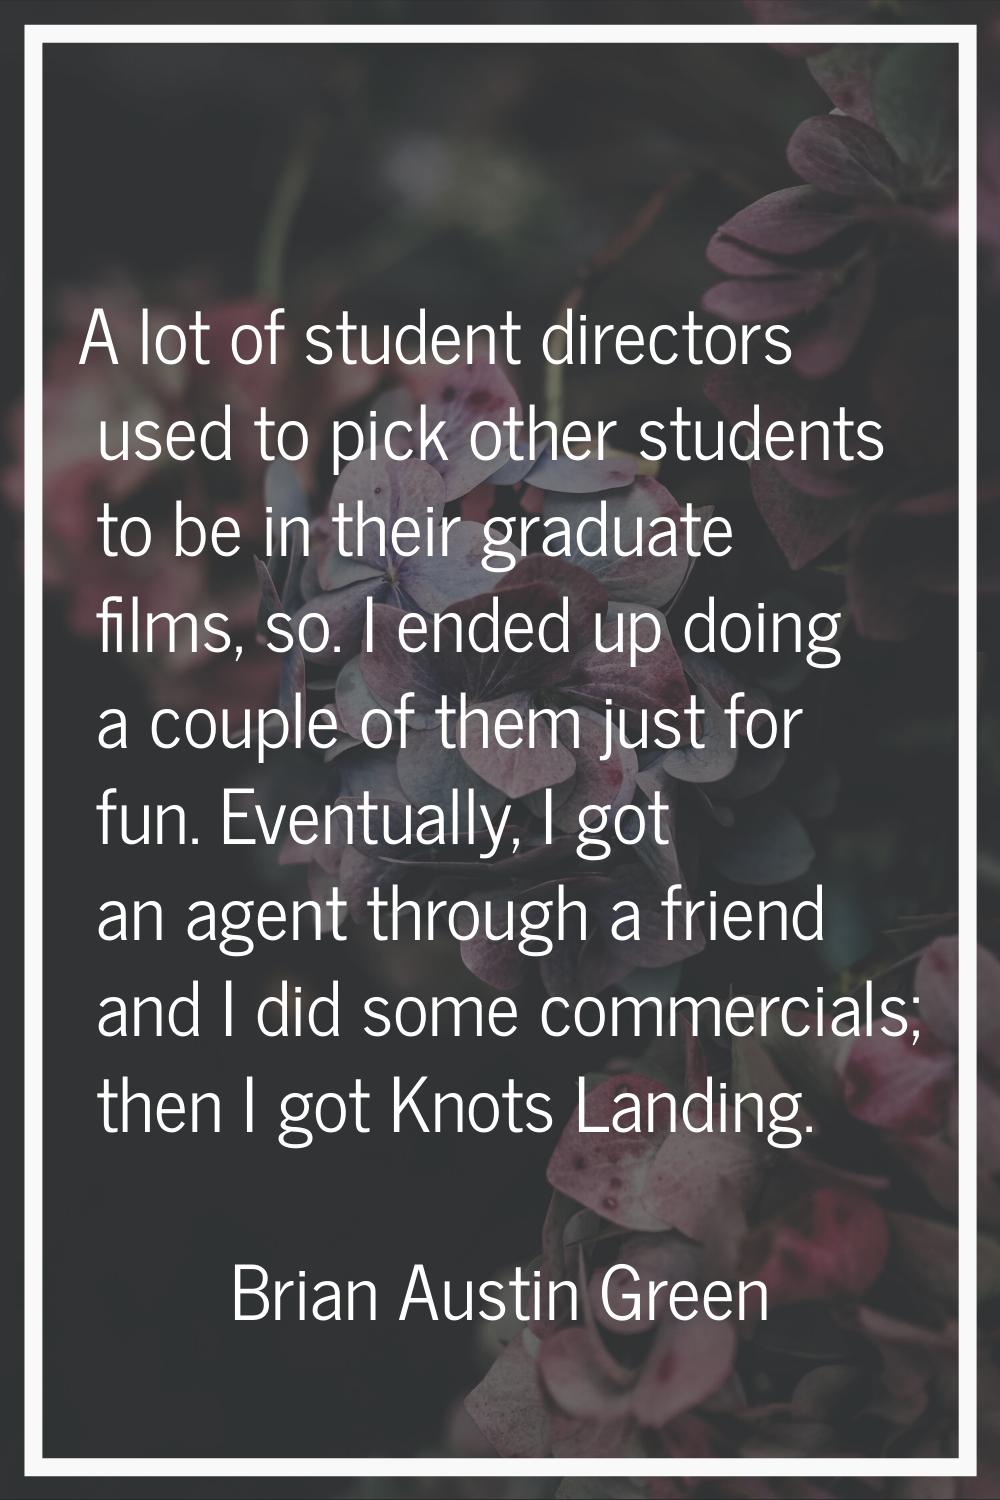 A lot of student directors used to pick other students to be in their graduate films, so. I ended u